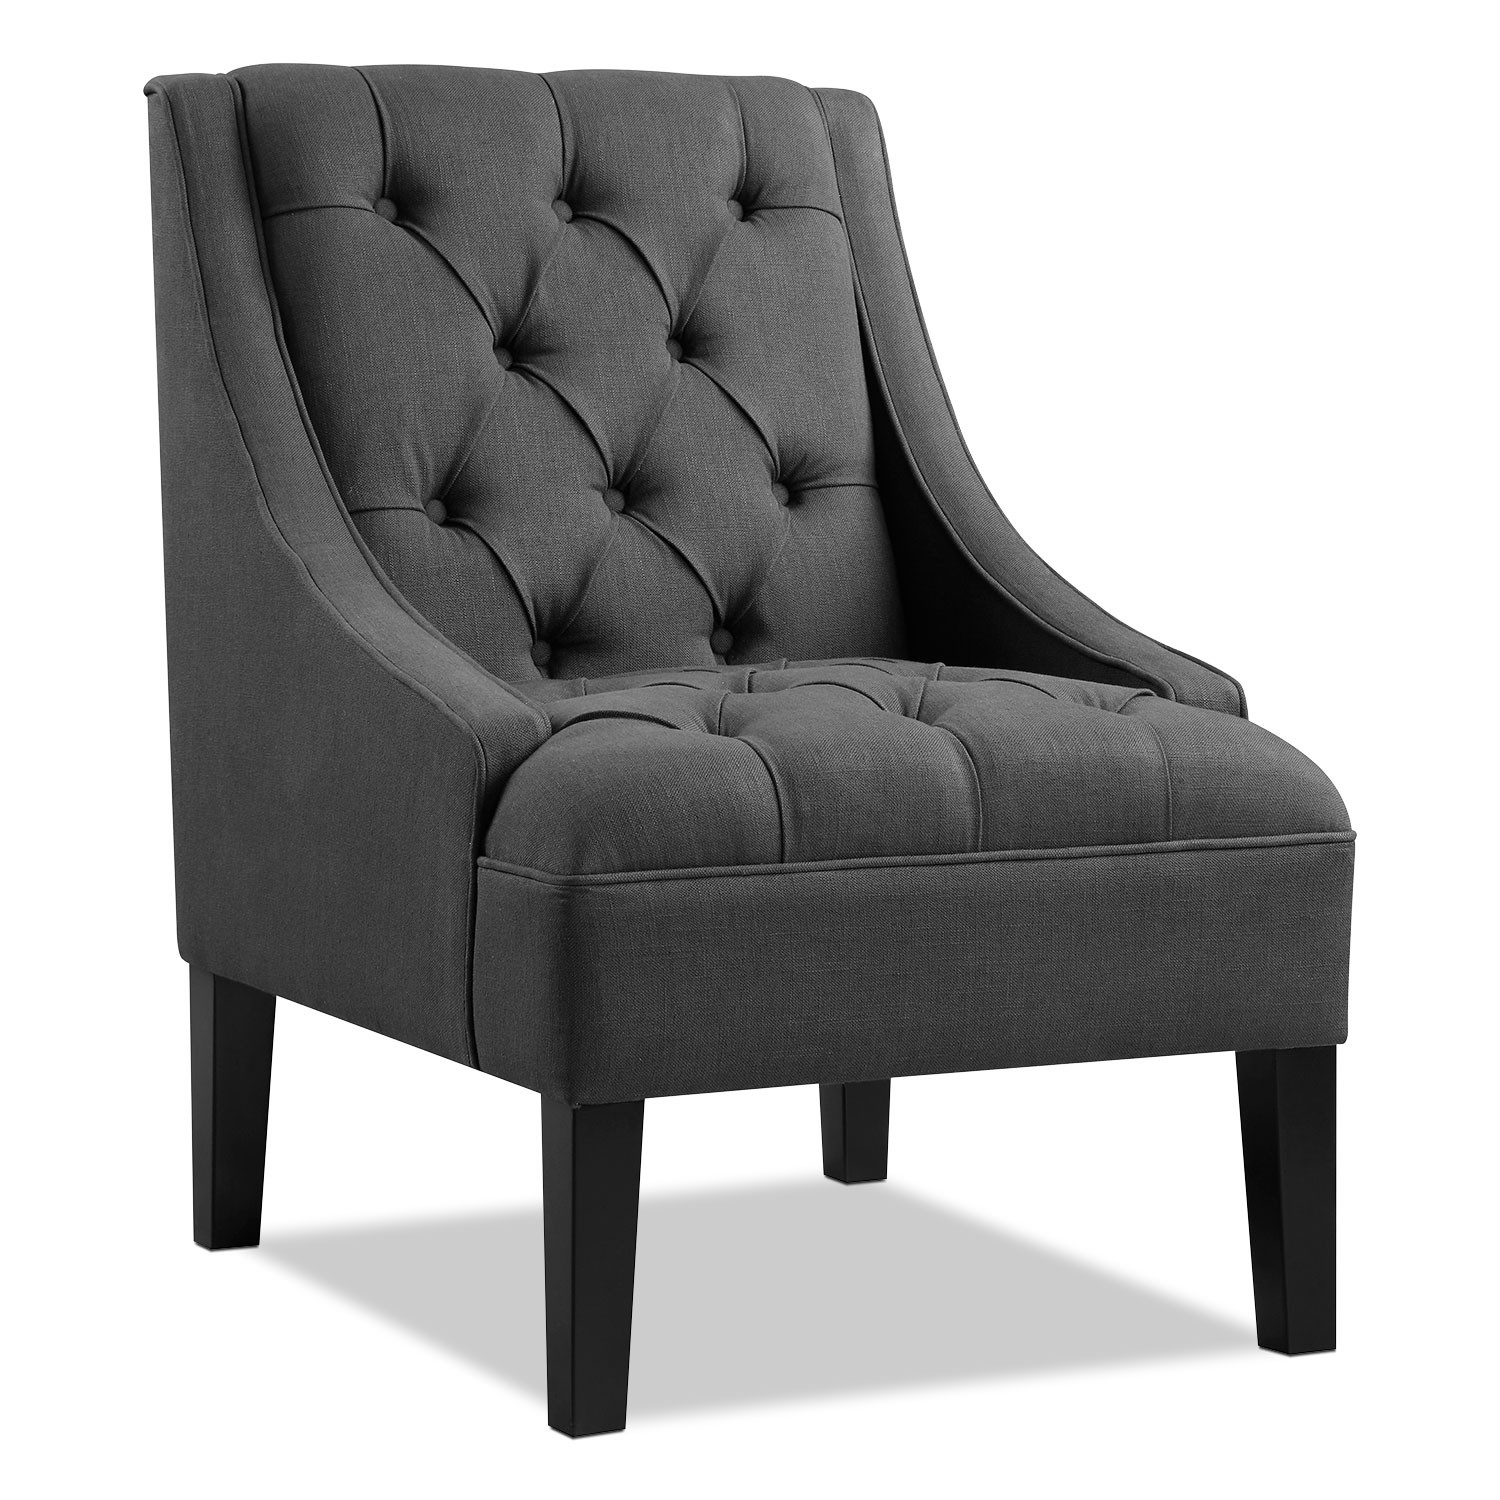 Accent Living Room Chairs
 Greylin Accent Chair Gray